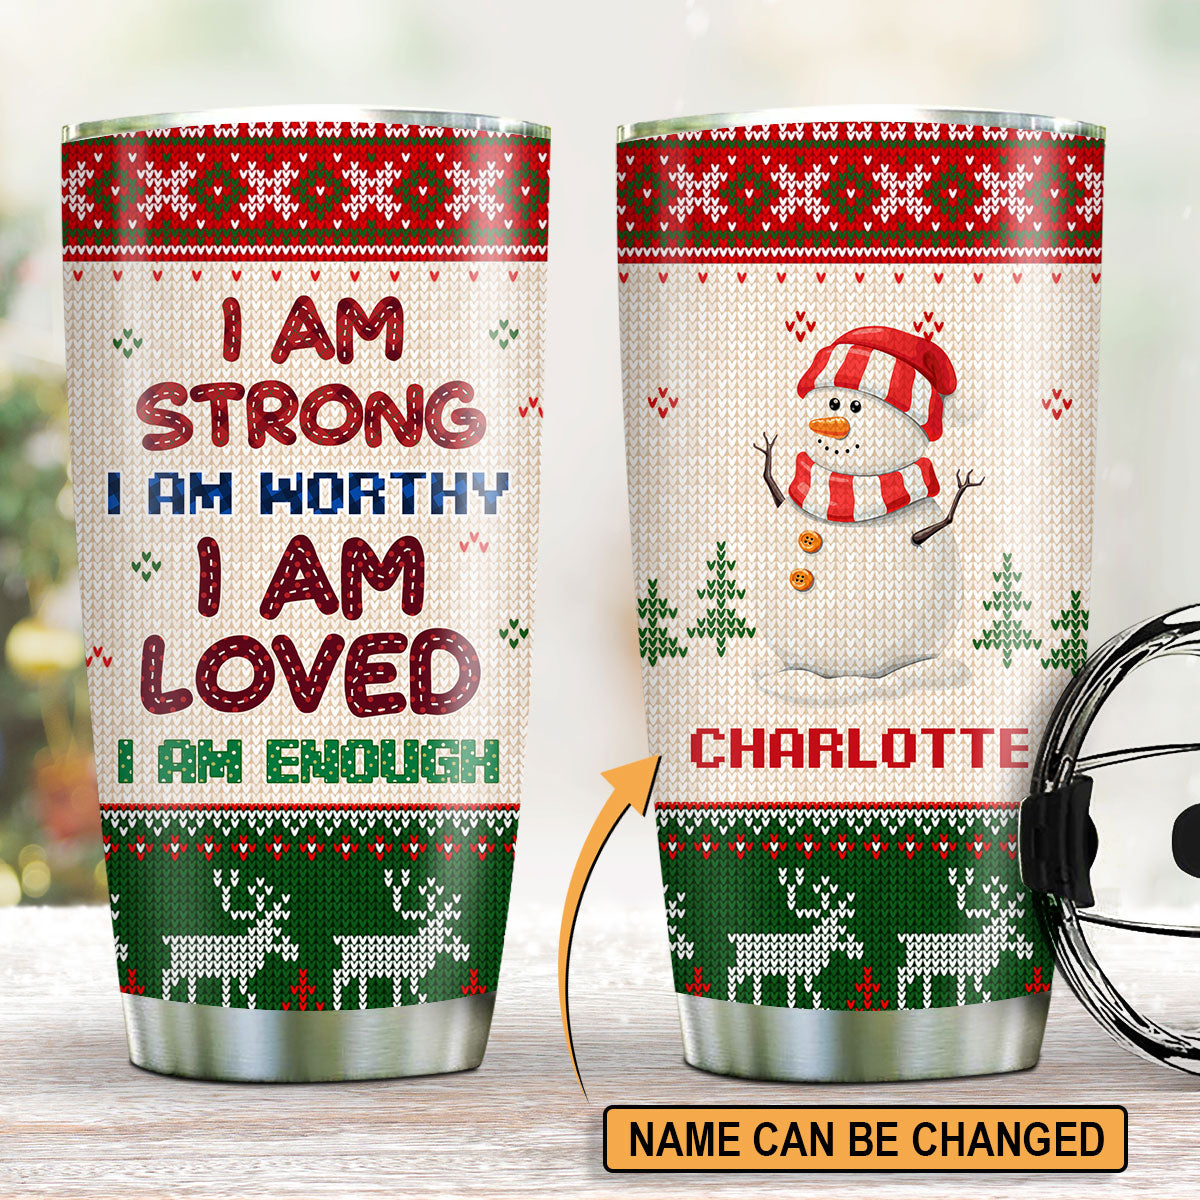 Personalized Tumbler 20oz Stainless Steel Insulated Personalized Gifts  Christmas Gifts For Men, Wome…See more Personalized Tumbler 20oz Stainless